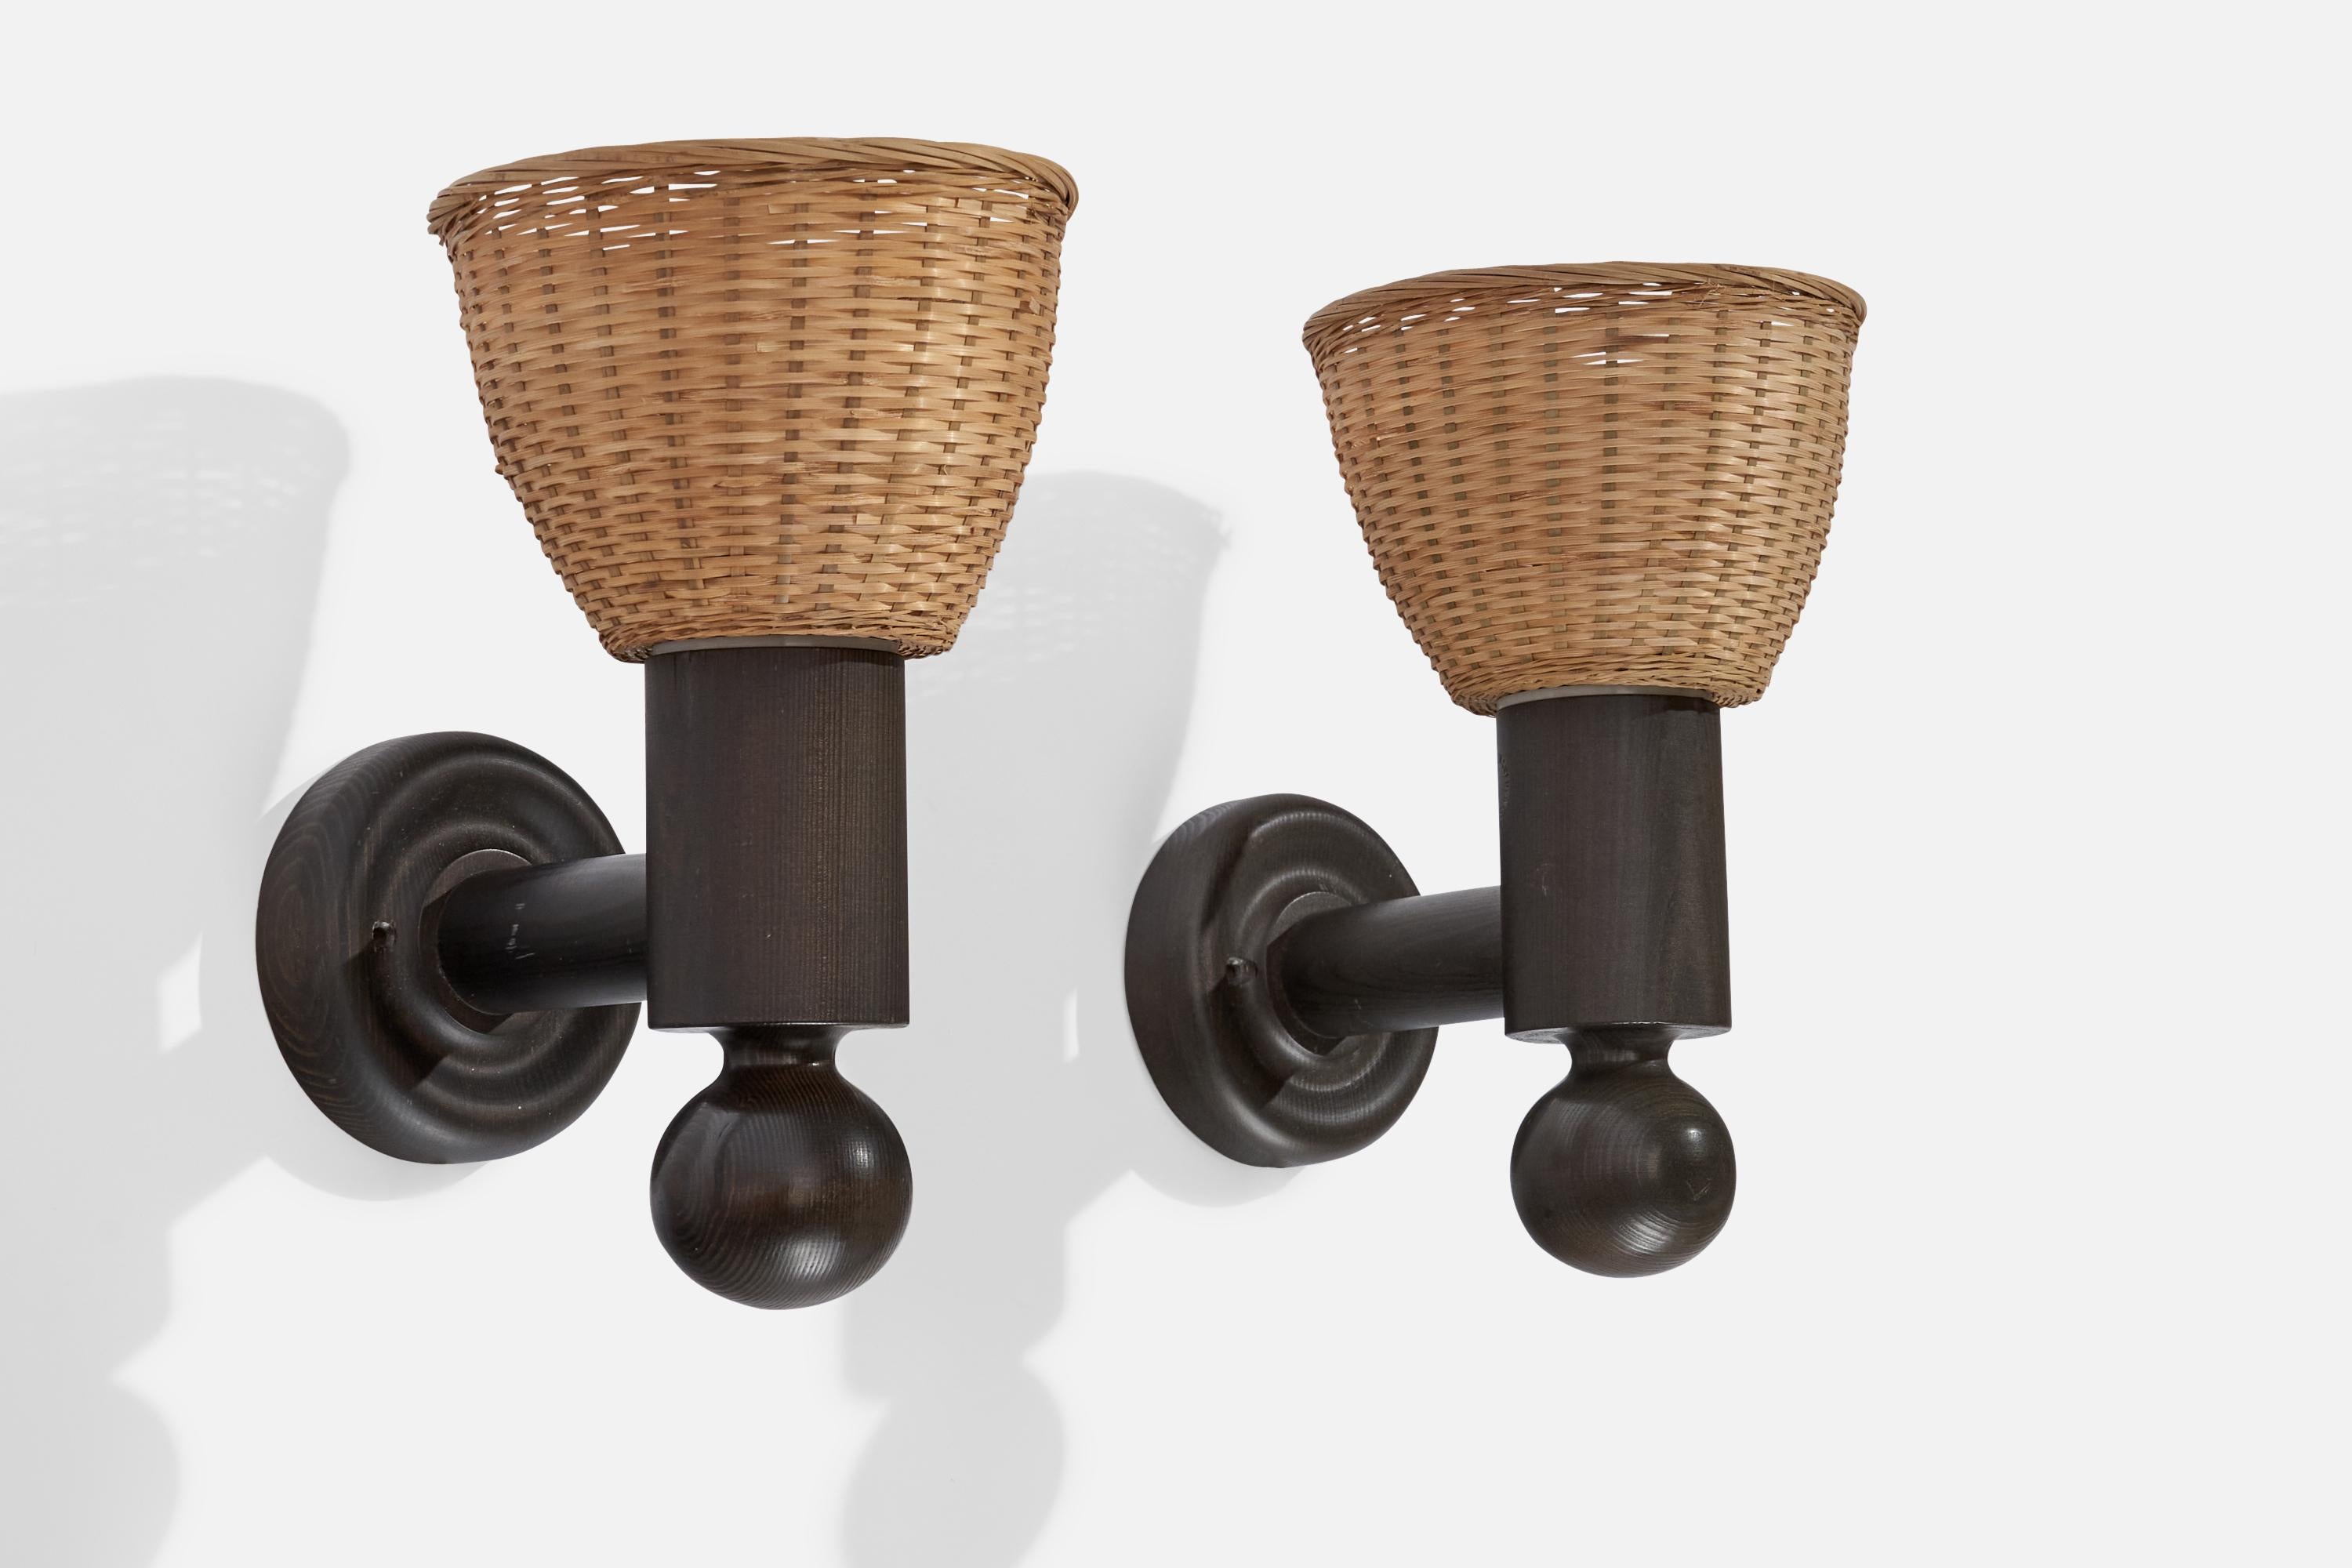 A pair of dark-stained pine and rattan wall lights designed by Uno Kristiansson and produced by Luxus, Sweden, 1970s.

Overall Dimensions (inches): 11.75” H x 6.75” W x 9” D
Back Plate Dimensions (inches): 4.73” H x 1.17” D
Bulb Specifications: E-26